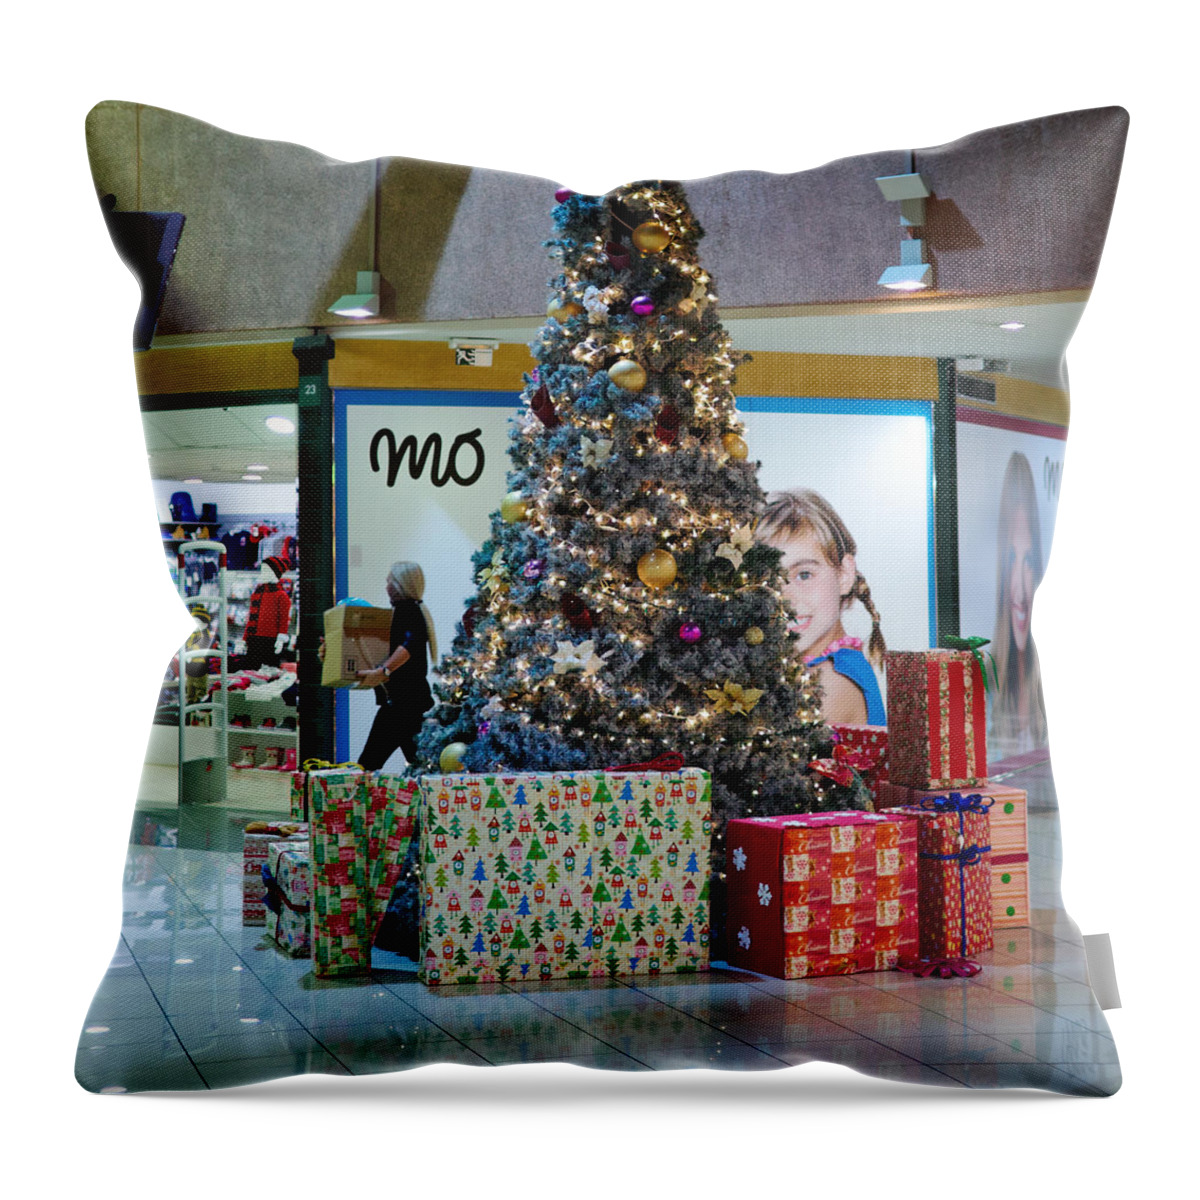 Atlantic Ocean Throw Pillow featuring the photograph The Move The Look by Jouko Lehto